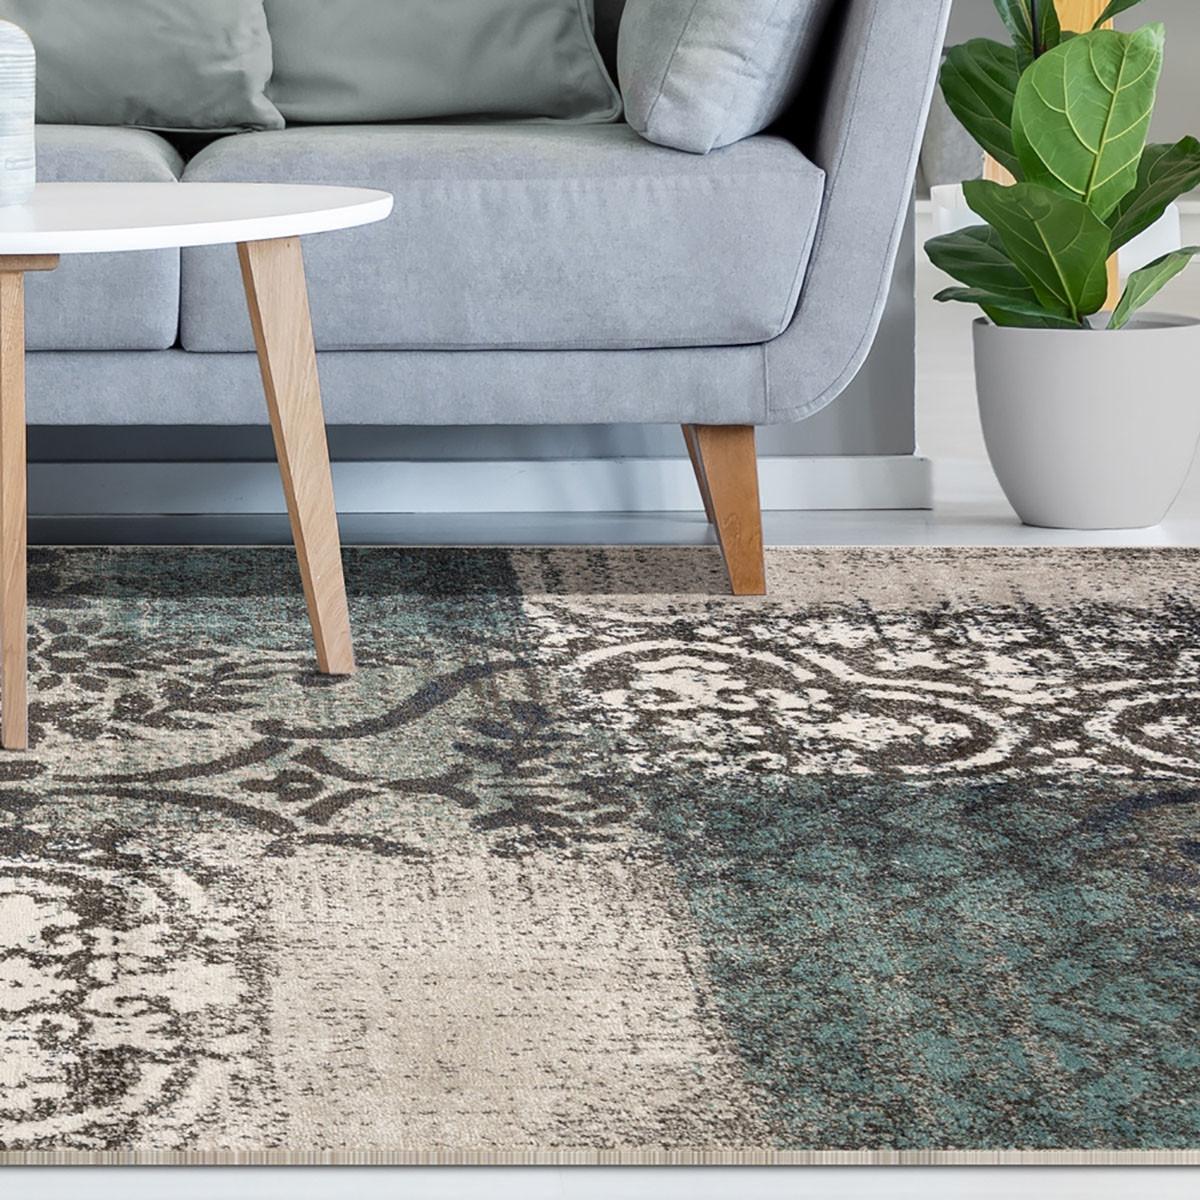 8' X 10' Teal And Gray Damask Distressed Stain Resistant Area Rug